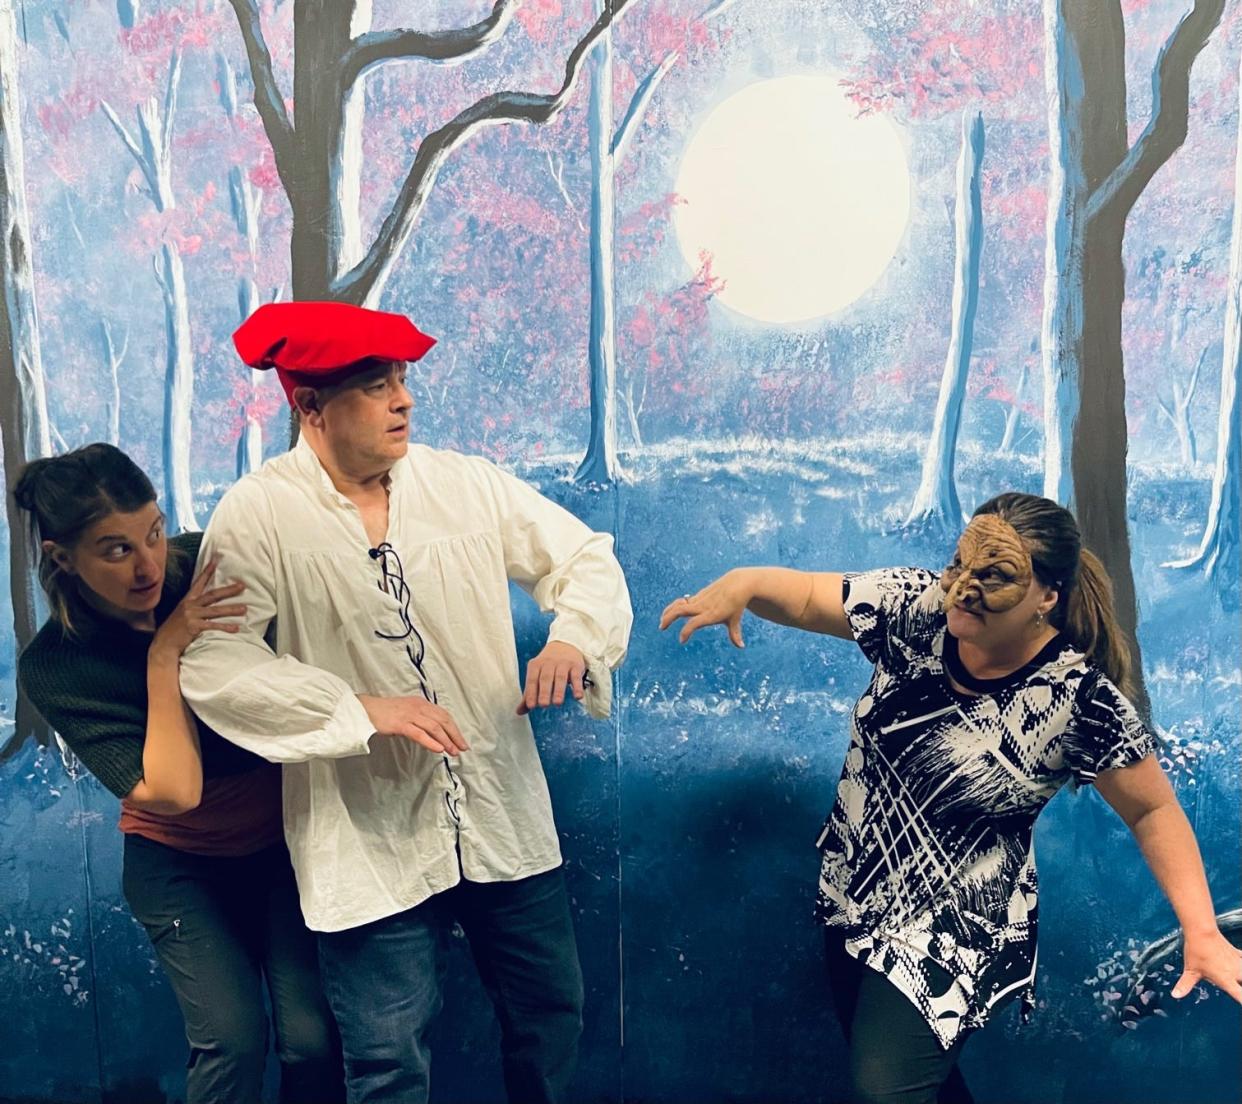 Lindsey Larson is pictured as The Baker's Wife while Tony Roberts is pictured as The Baker and Julie Seeley is pictured as The Witch.
The scenery was painted by David Gregory.